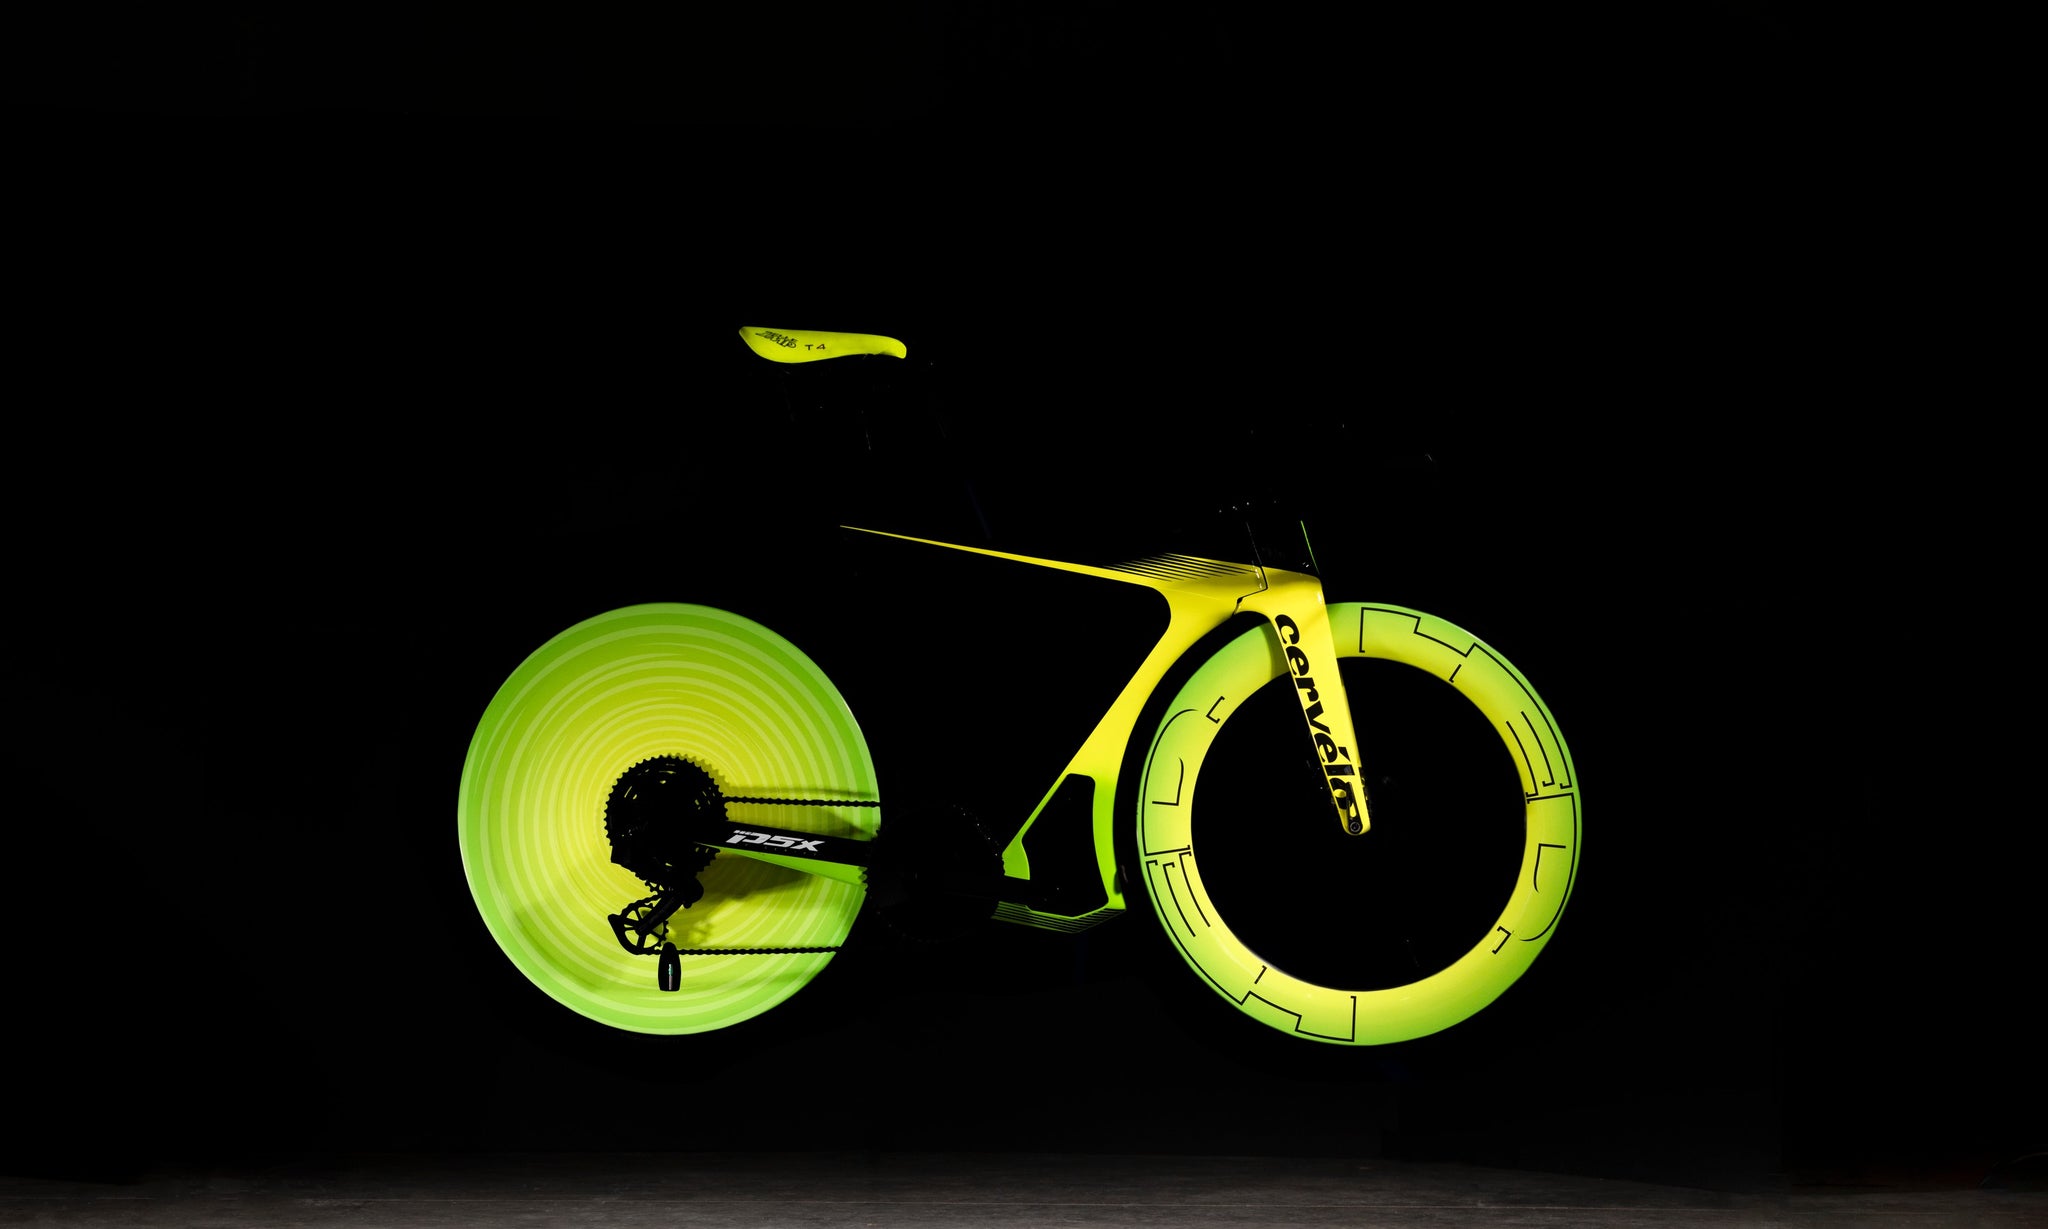 Cervelo P5X: A Real-Life Tron Bike That’s Crazy but Also… Practical?